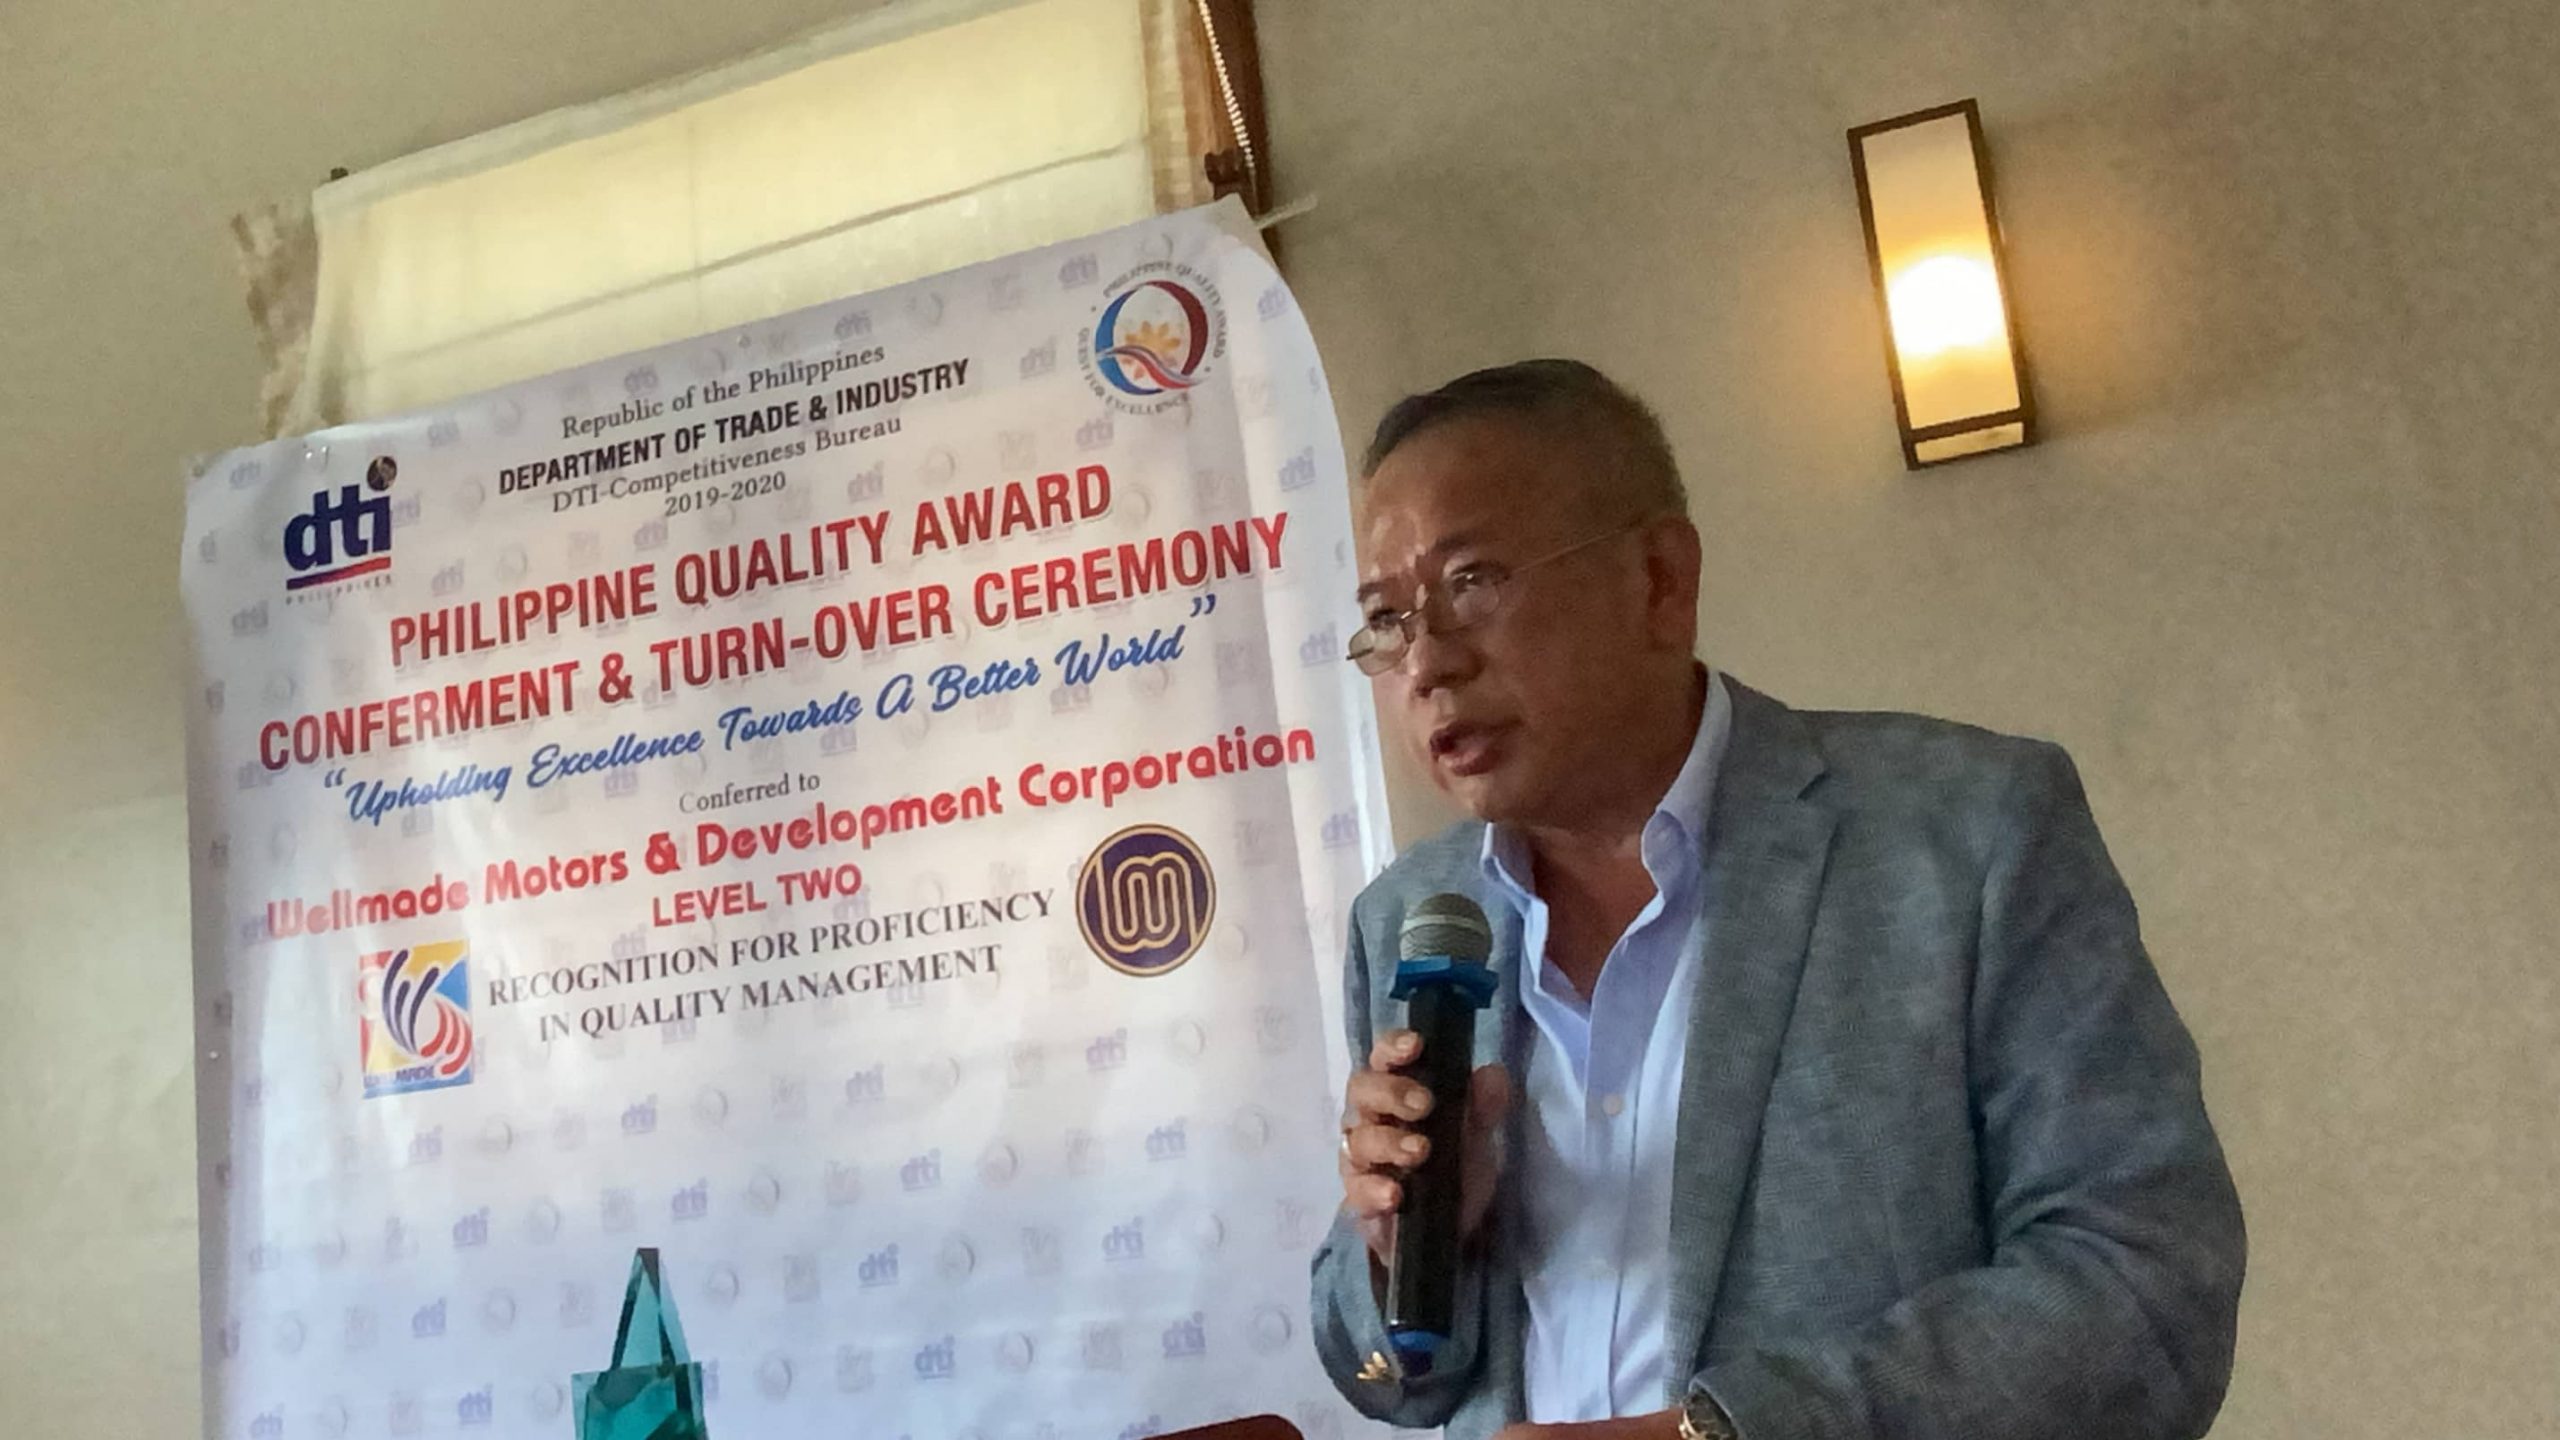 GLOBAL STANDARD. Wellmade Motors and Development Corporation President and Chairman Philip N. Tan said that the PQA award means that “when people come and work with us, they get assured that the product and service that we provide is at par (with global standards).”